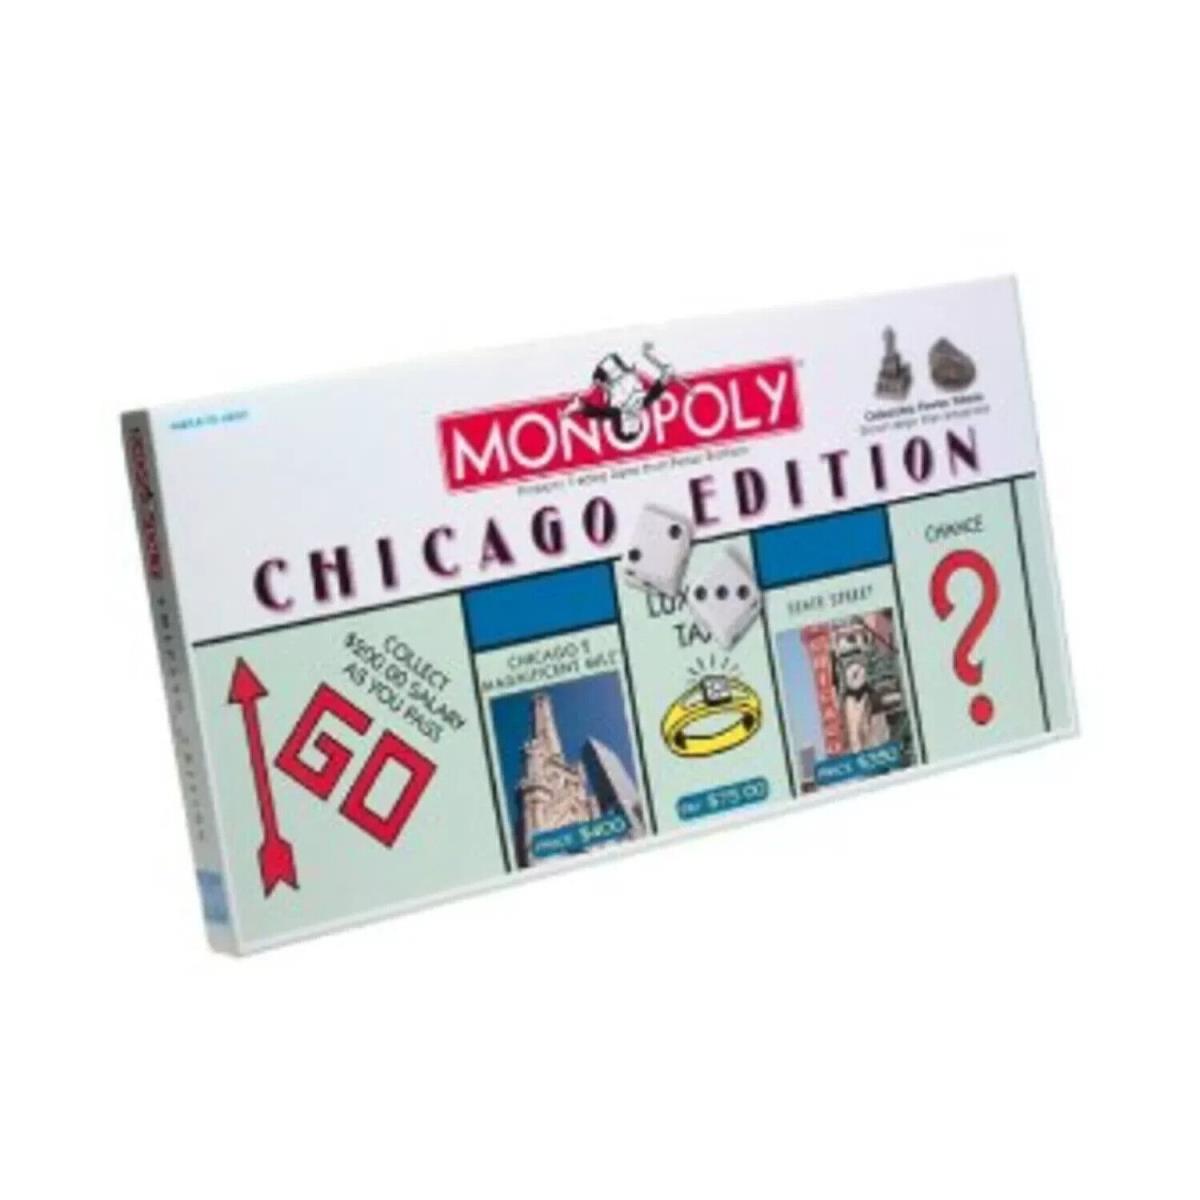 Hasbro Monopoly Chicago Edition Game by Usaopoly 2000 Nisp